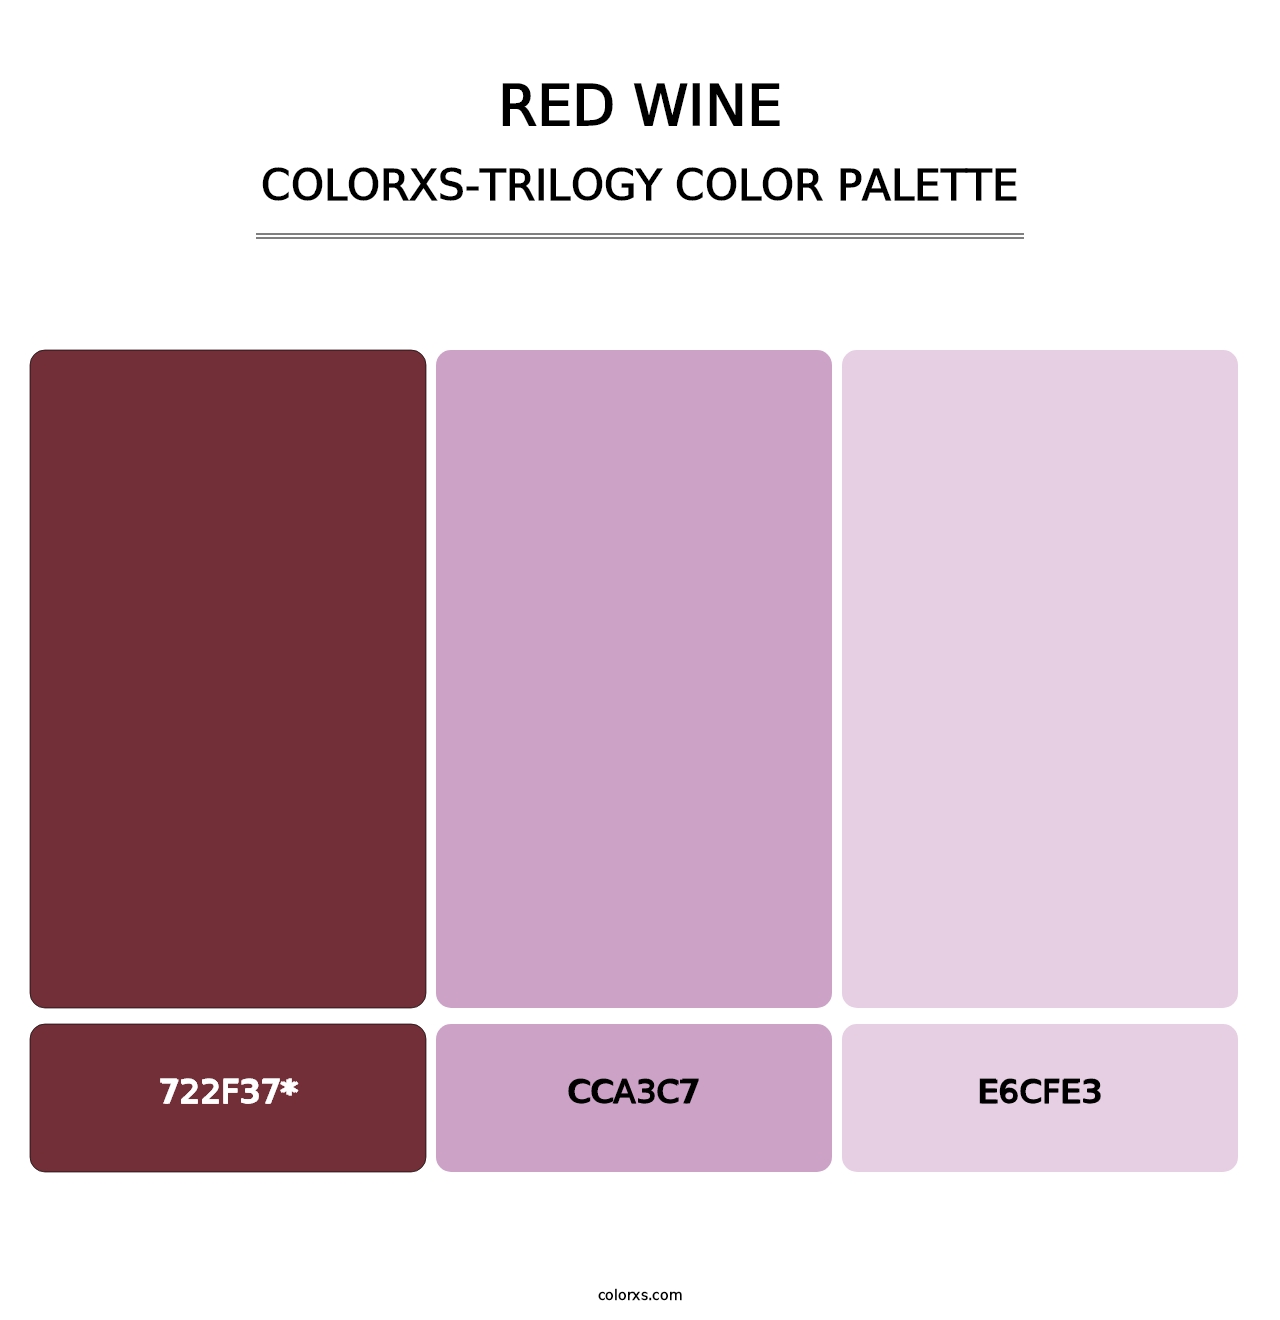 Red Wine - Colorxs Trilogy Palette